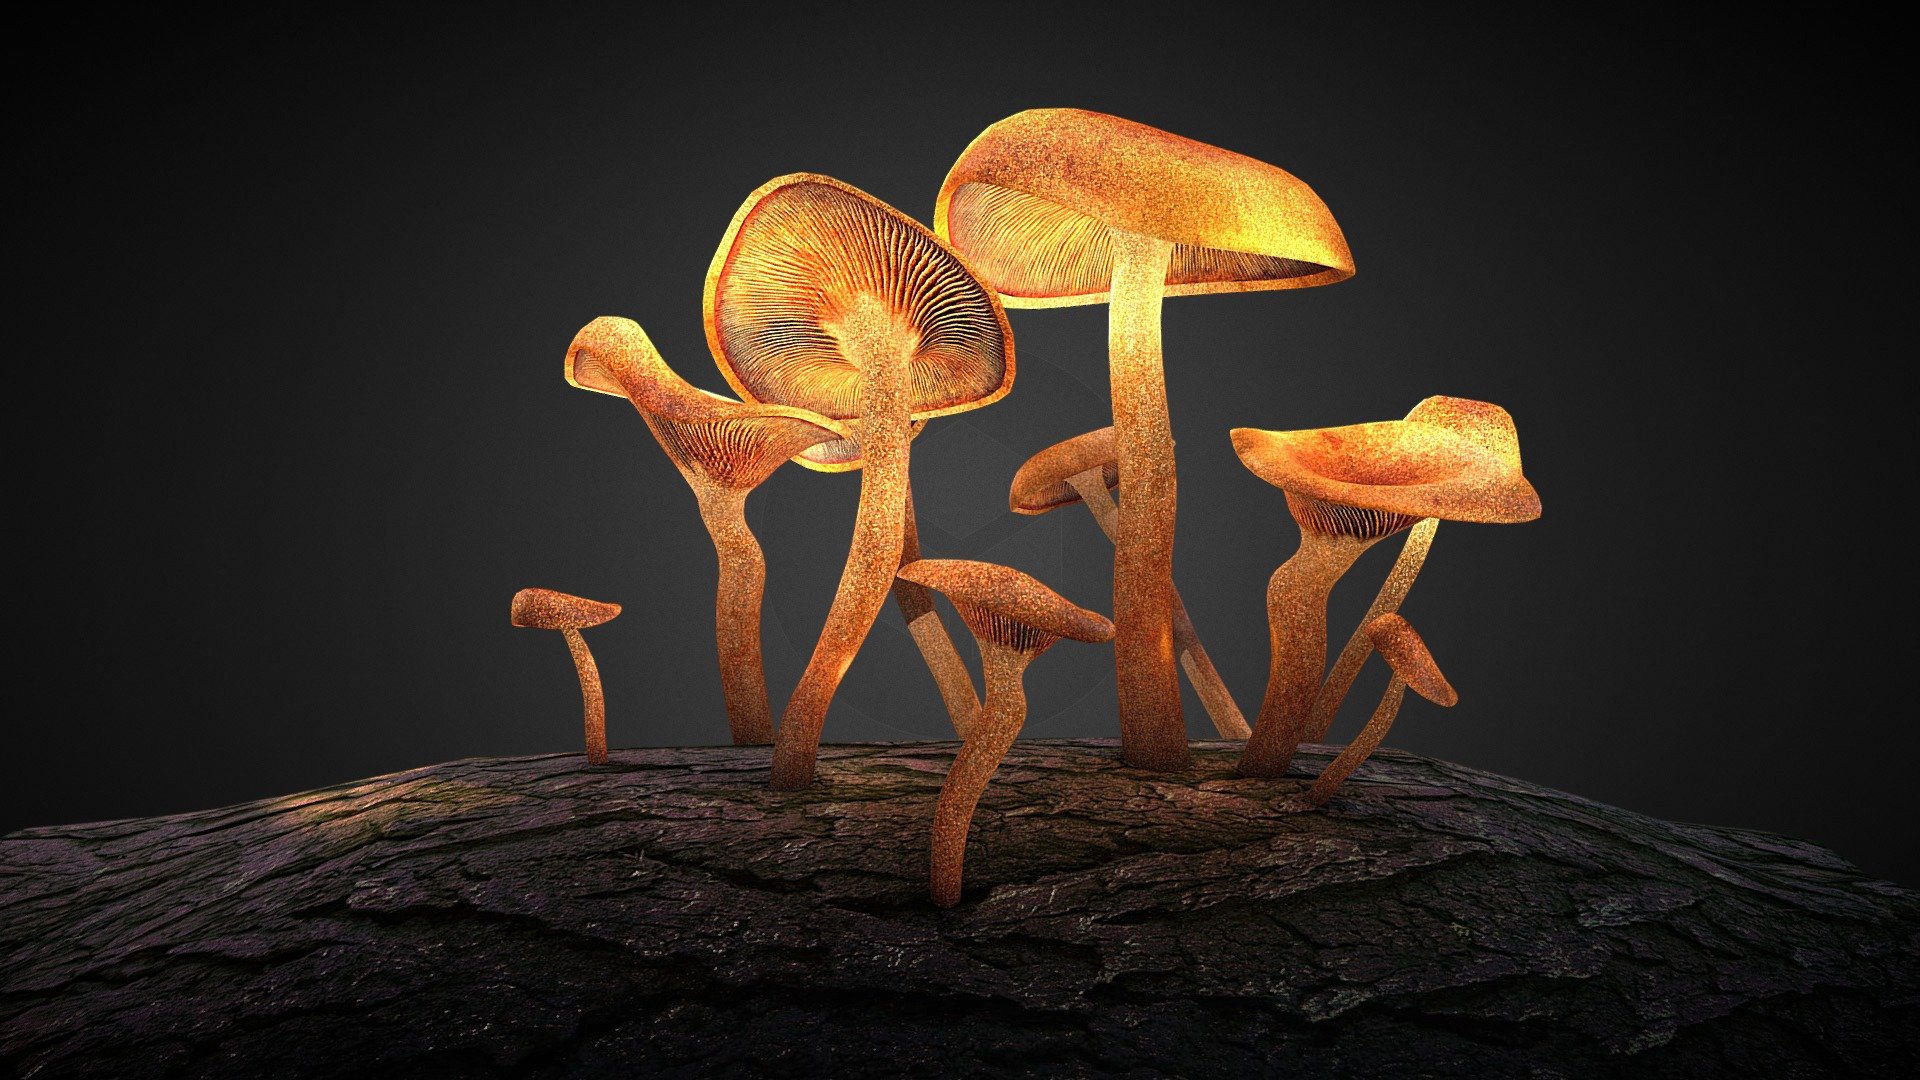 Trying the idea of baked lighting, and substance designer for that matter.

A simple scene made by following the tutorial here
-https://youtu.be/XGnDu_NsTss

You can use the same utility on a lot of background object, as long as you know lighting well enough.
This idea of mushroom glowing but glowing is really interesting to me 3d model